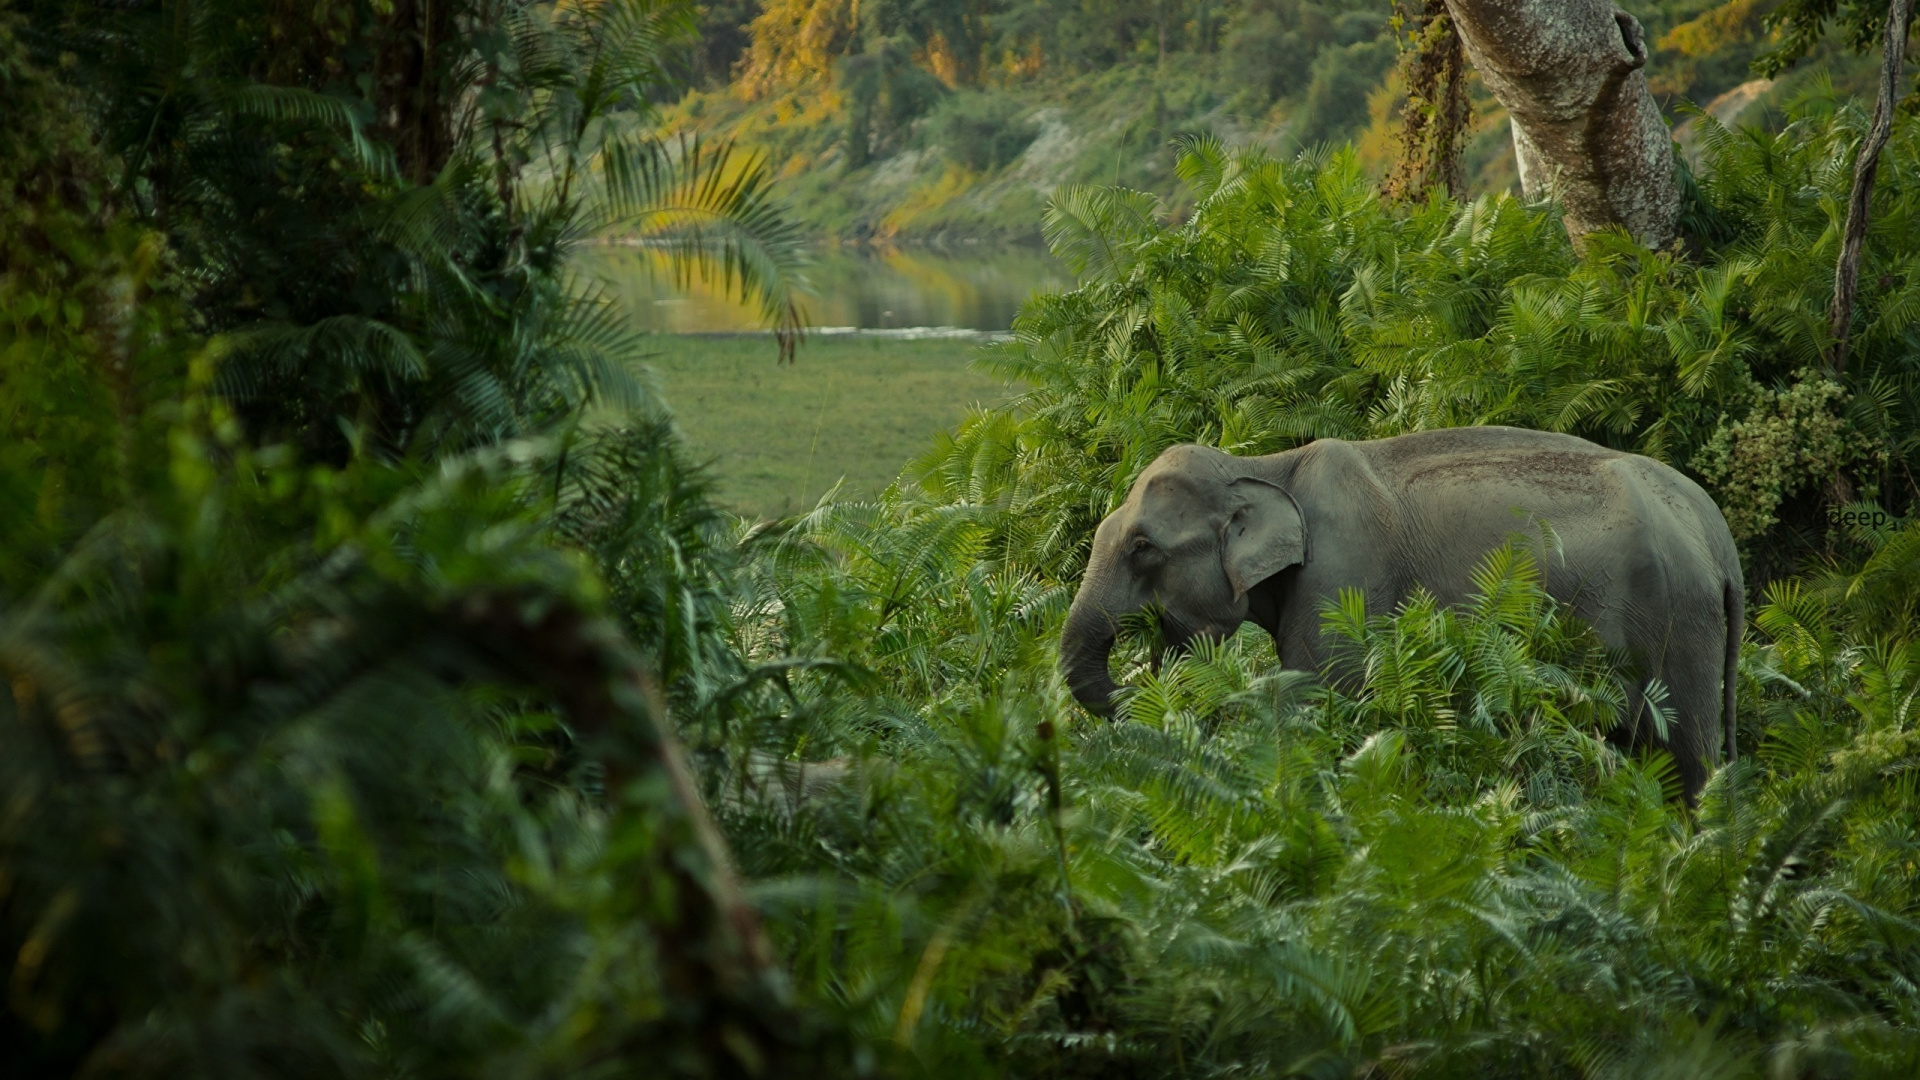 Elephant Eating Grass During Daytime. Wallpaper in 1920x1080 Resolution